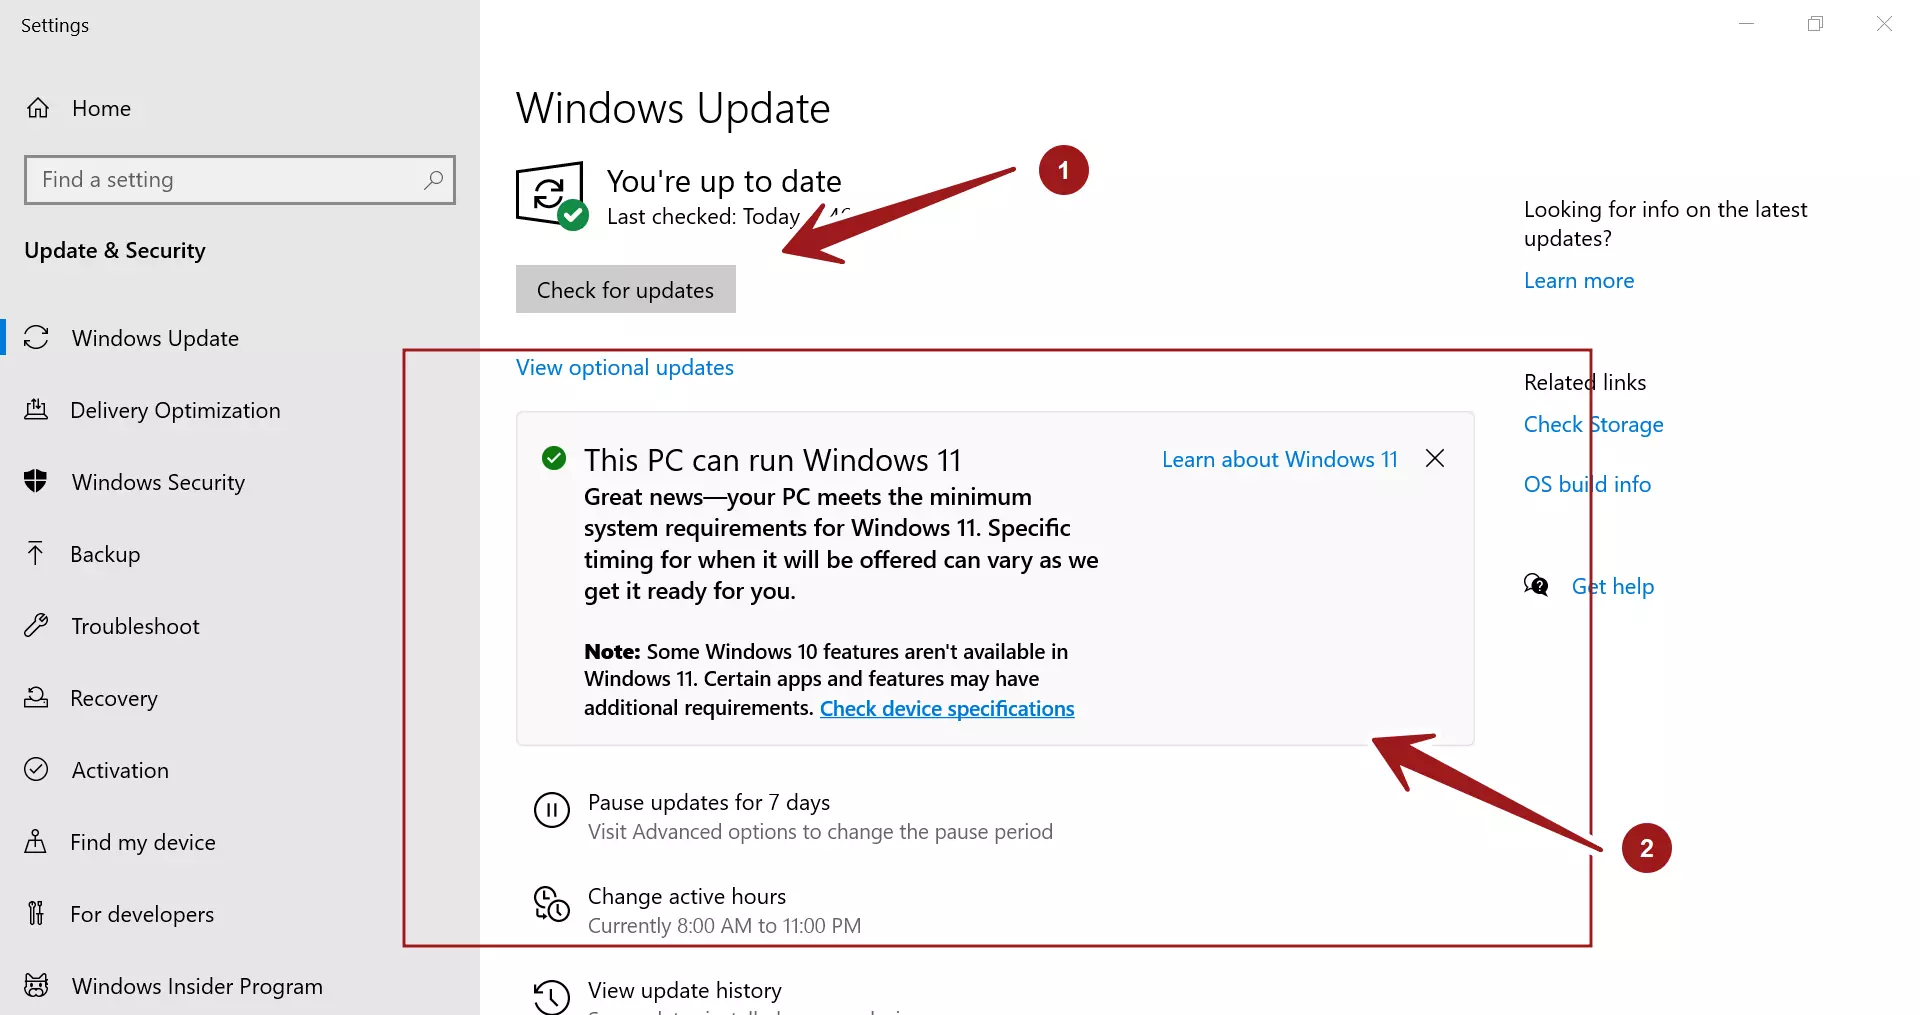 Windows 10 to 11 Update Experience